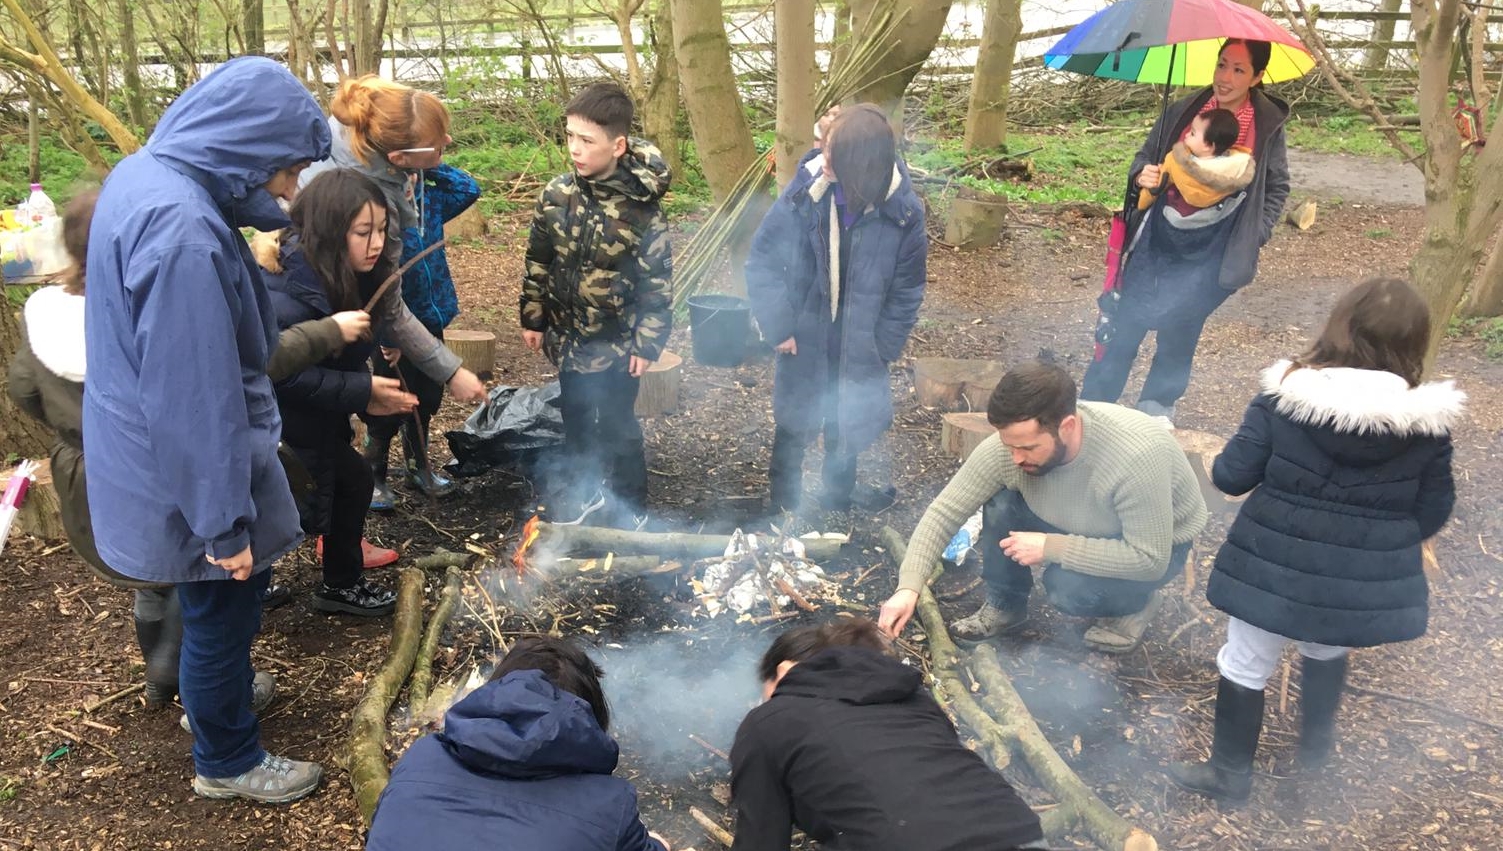 Children and adults gather around a camp fire